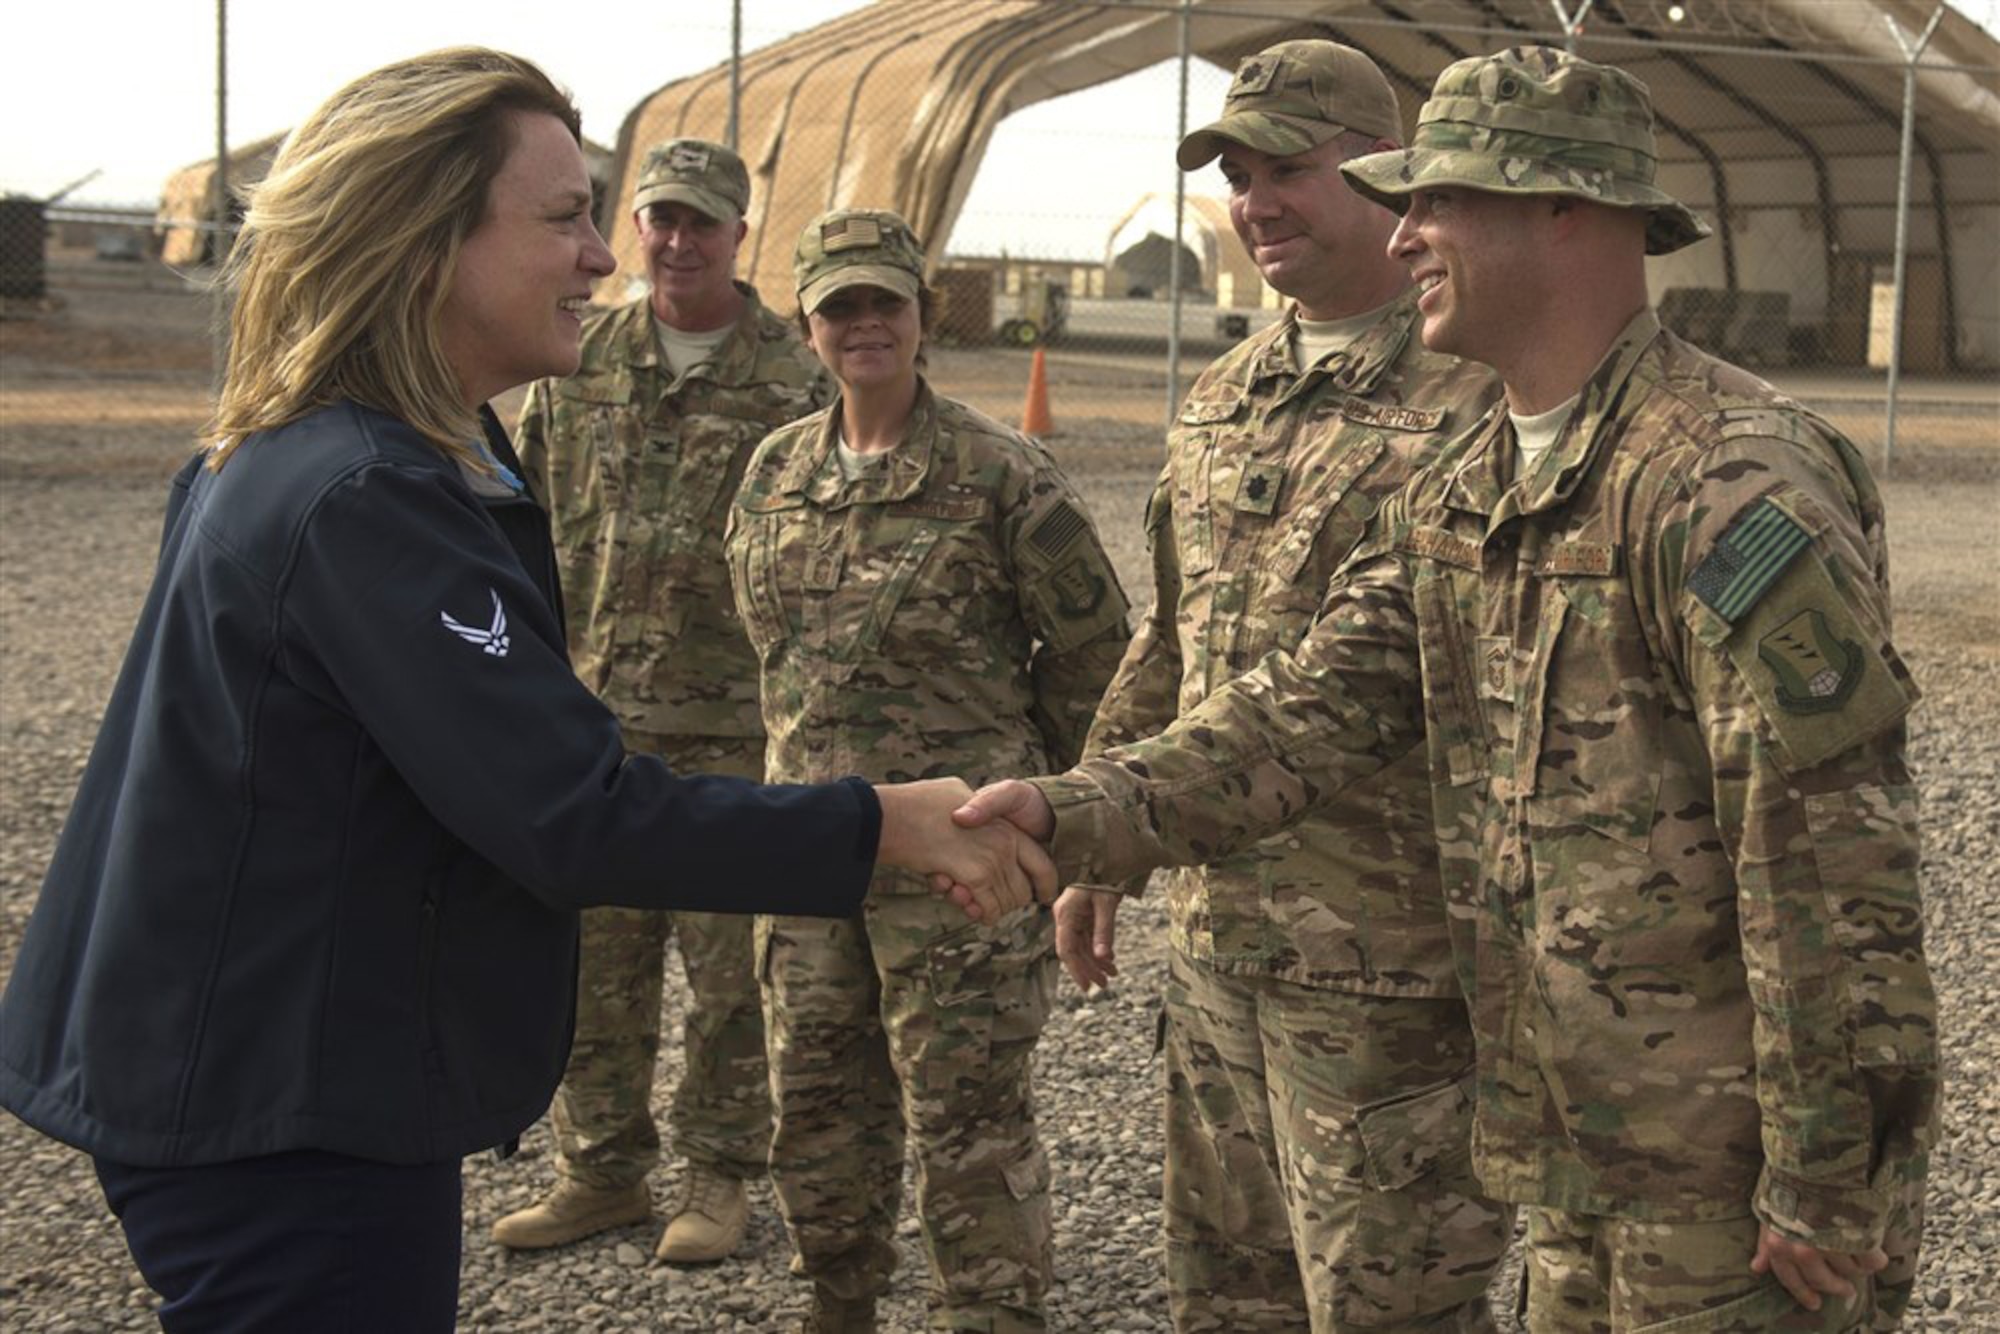 Secretary of the Air Force Deborah Lee James greets Chebelley Airfield leadership Nov. 12, 2015, in Djibouti. During her visit to Chebelley and Camp Lemonnier, James interacted with Airmen across a wide spectrum of career fields as she learned about the critical operations in each location. (U.S. Air Force photo/Senior Airman Peter Thompson)